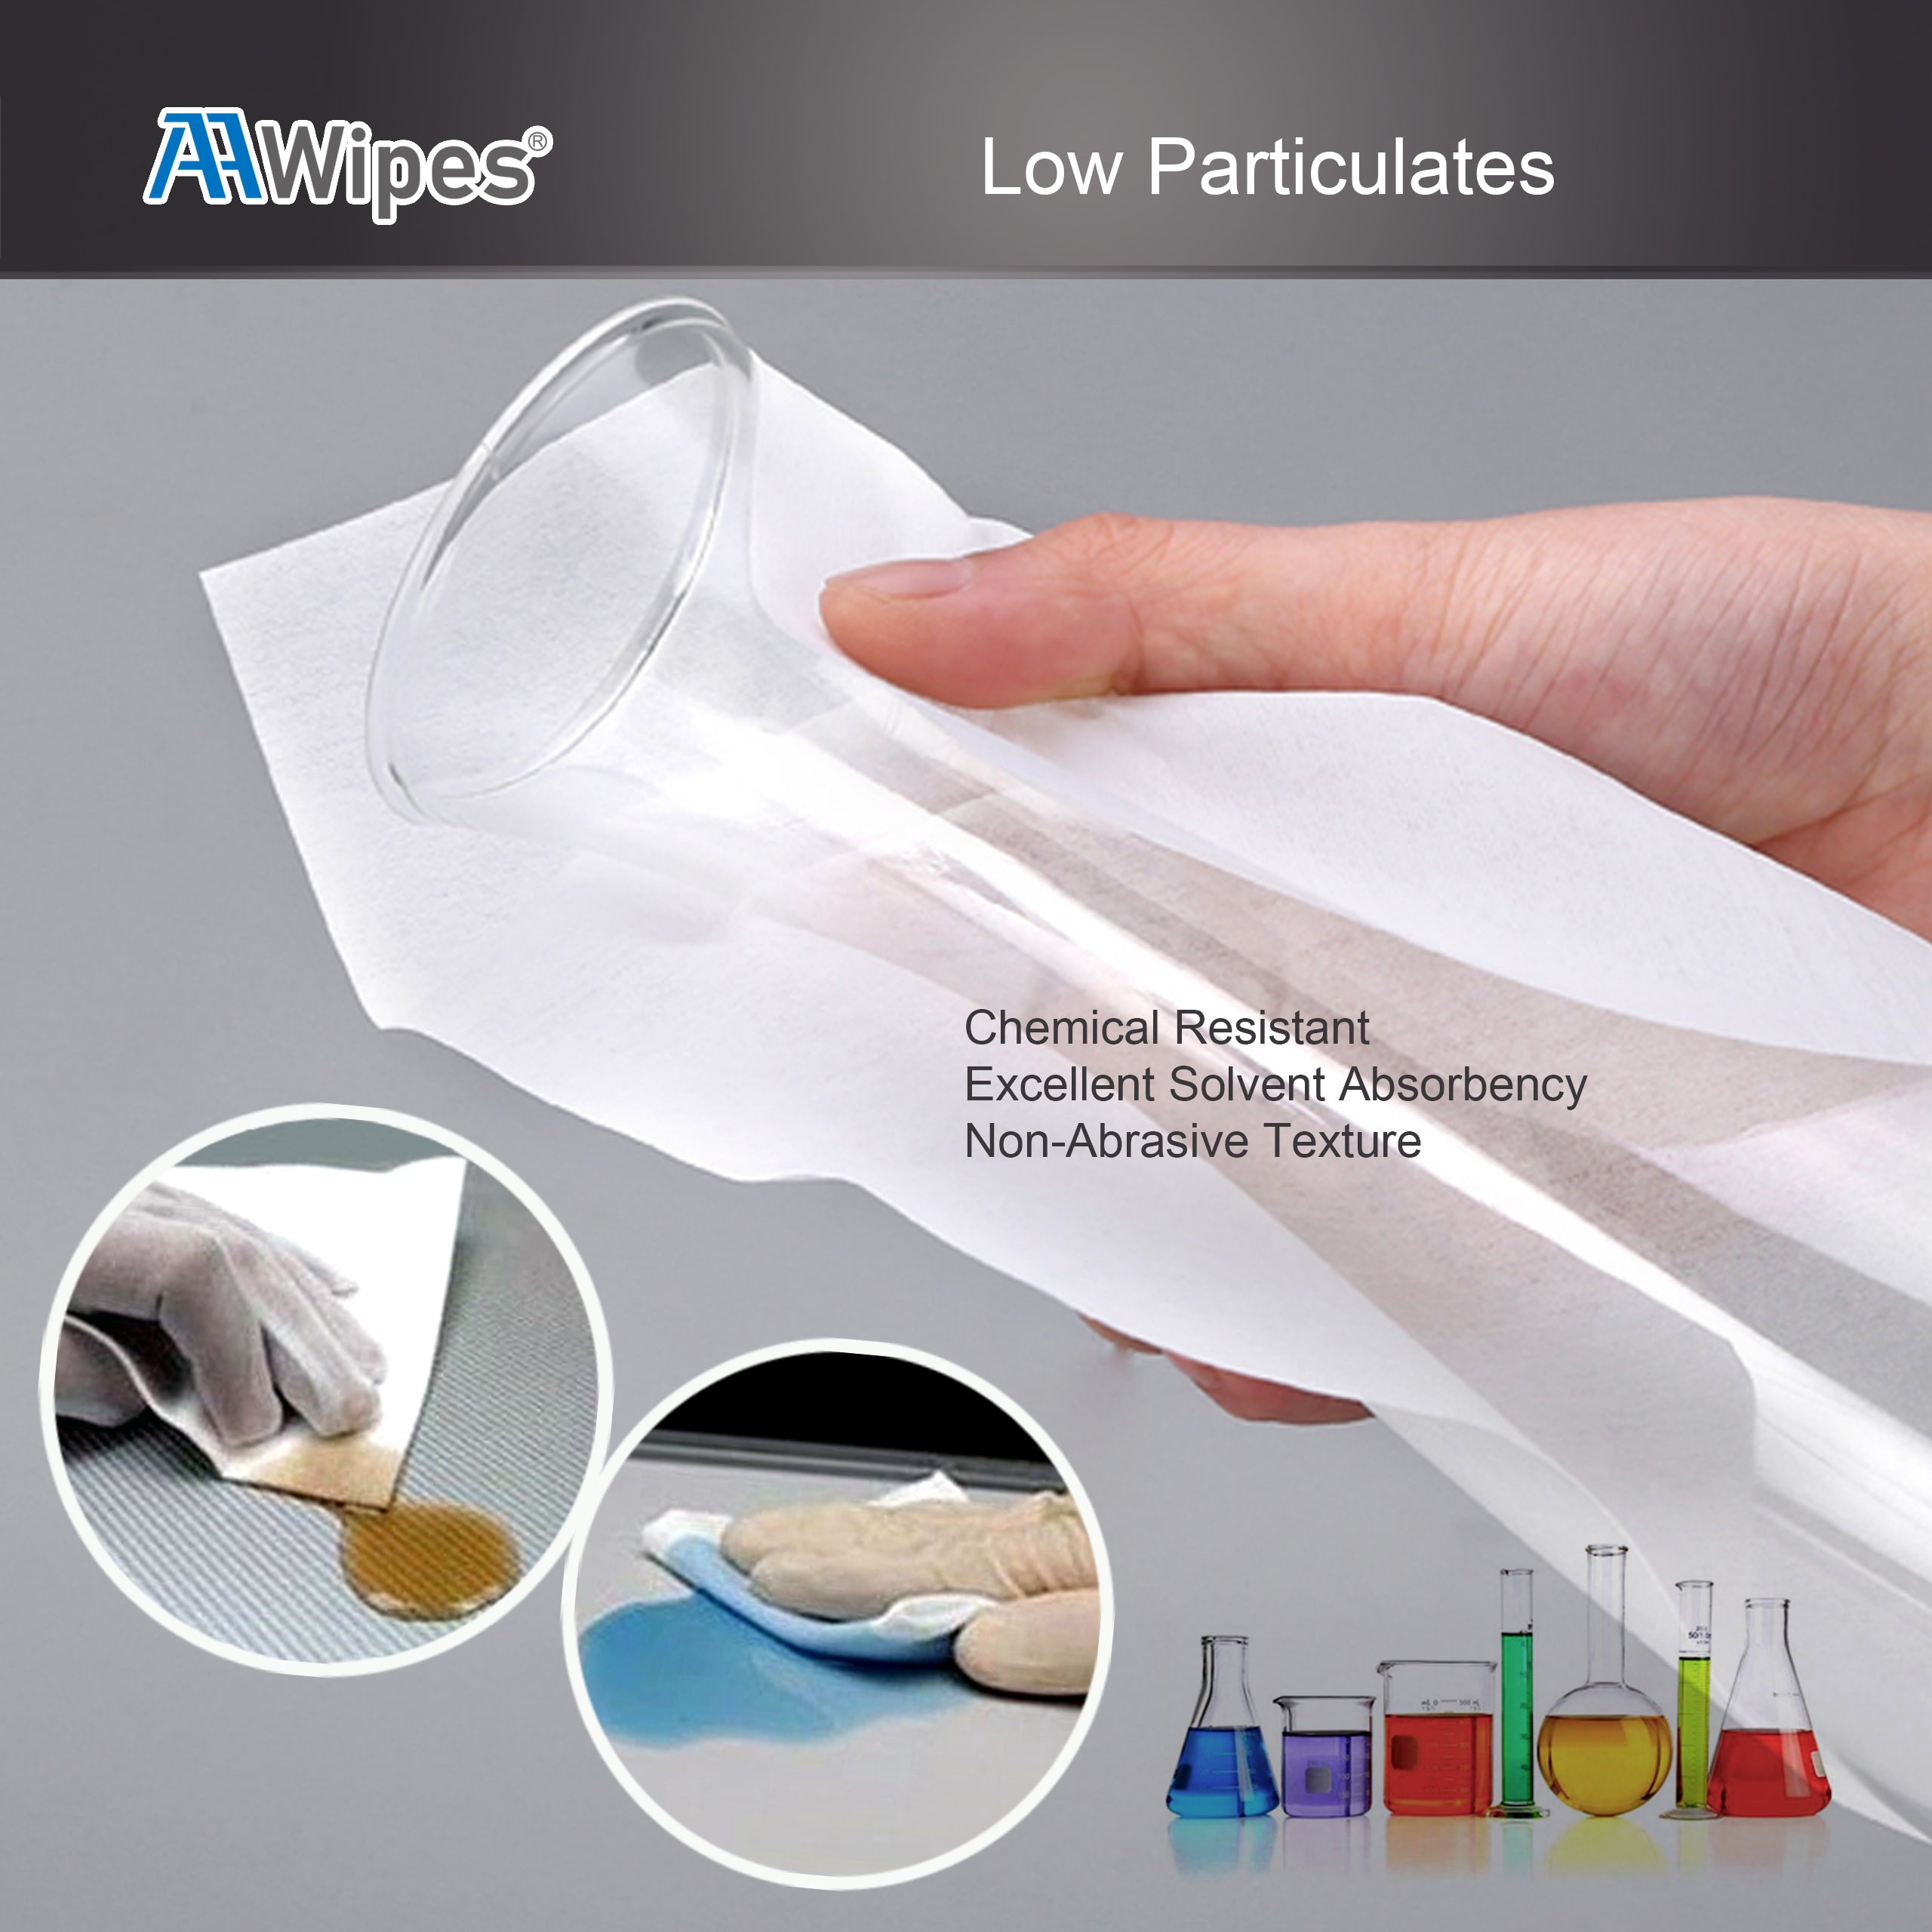 Disposable Cleanroom Nonwoven Lab Wipes for Delicate Task, Cellulose/Polyester Blend Nonwoven Wiper, 6" x 6" (Starting at 1 Box 9,000 Wipes per 30 Bags) (No. NW06806)